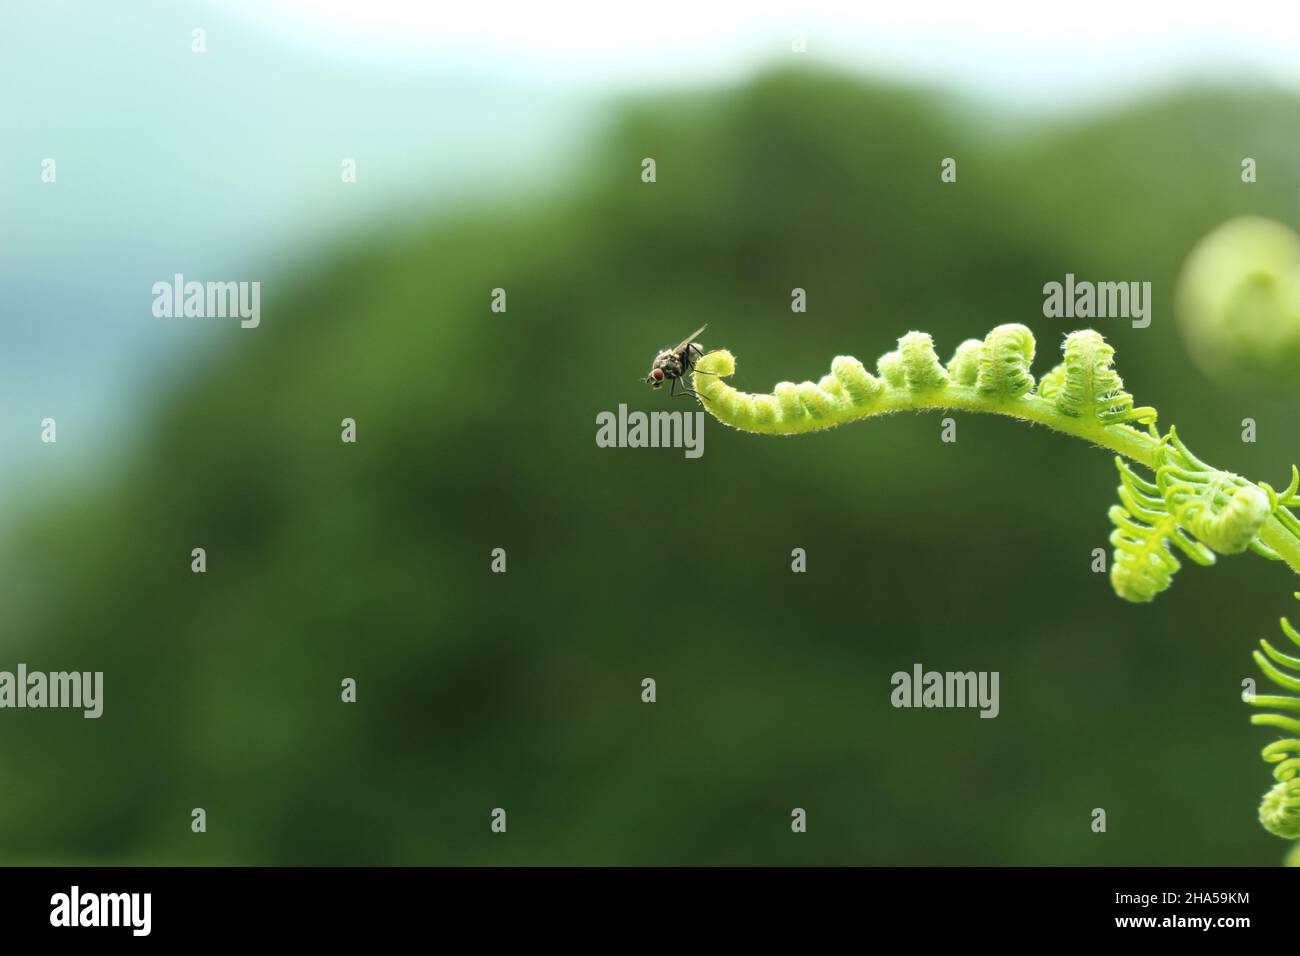 Horse fly on a furled fern frond (Lake District, Cumbria, England). Insect seen on the tip of bracken, great nature, insect wallpaper or background. Stock Photo